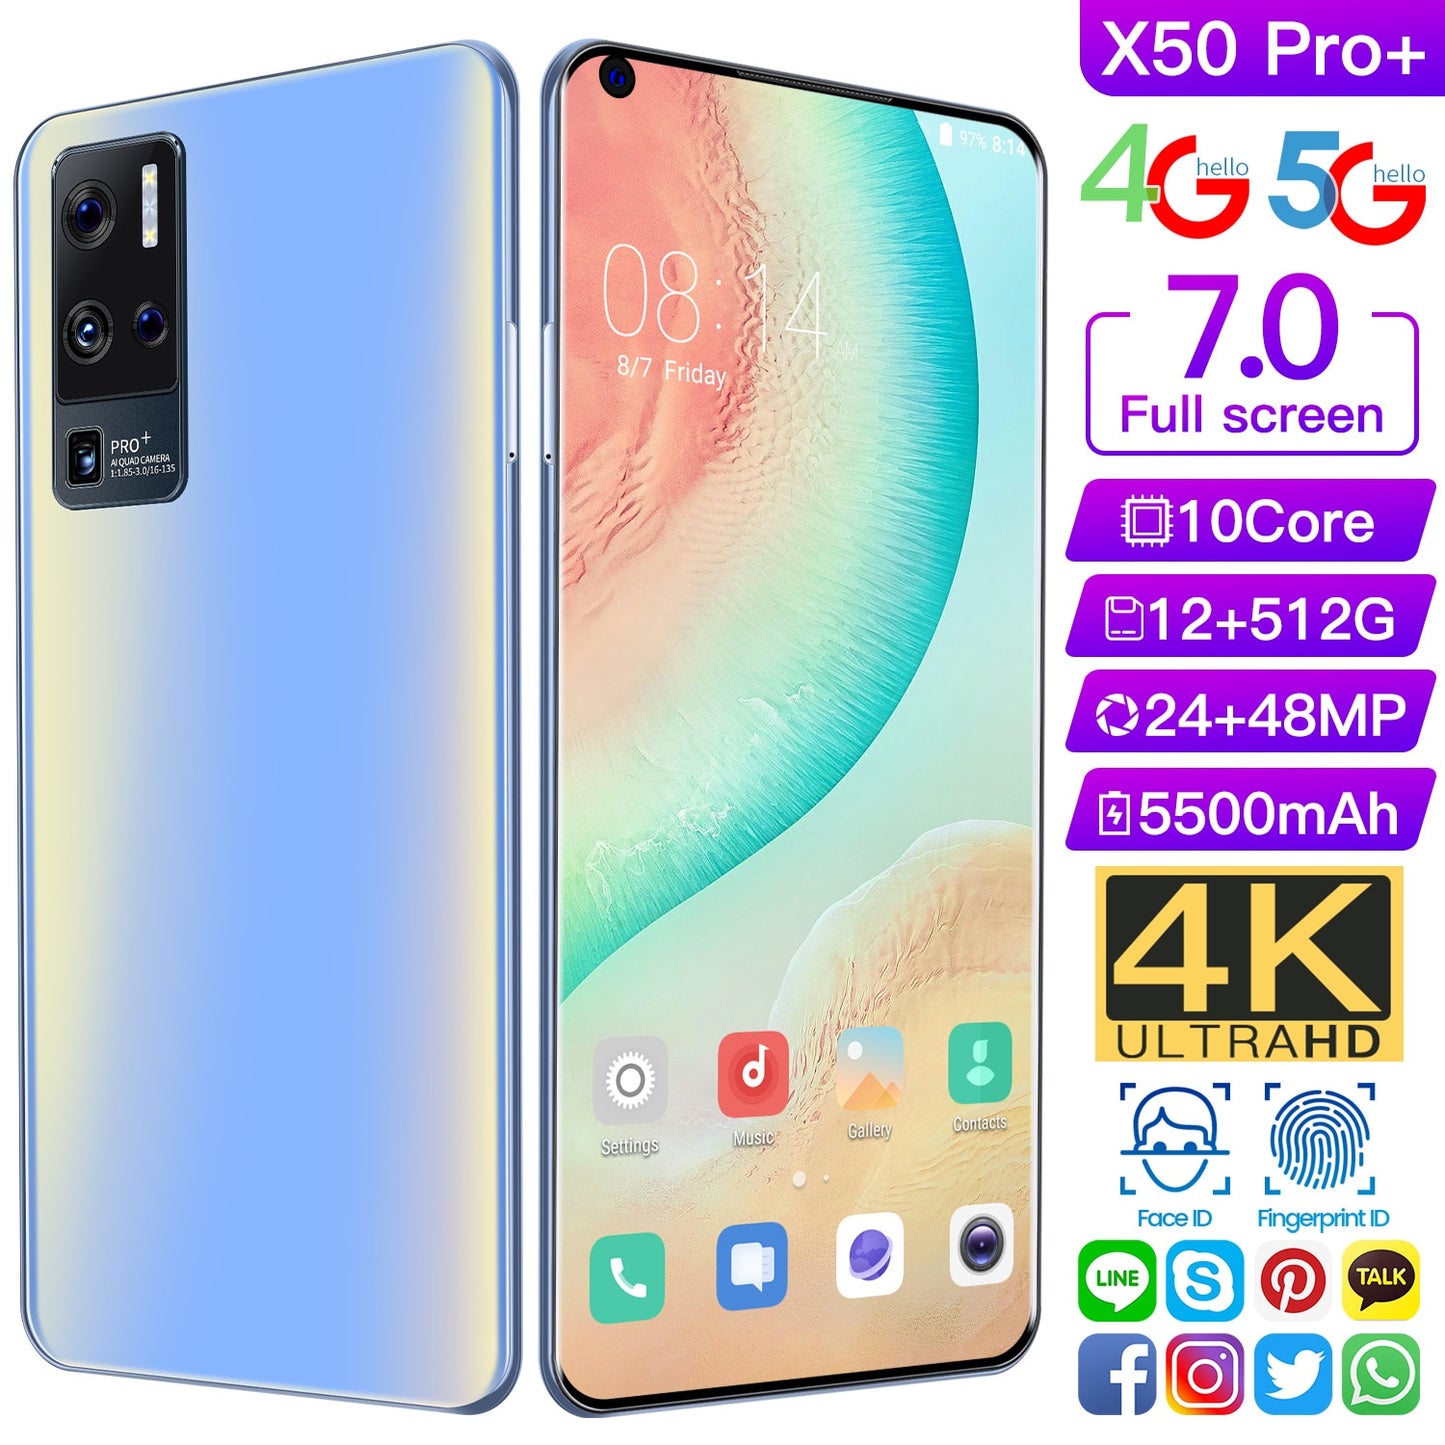 New Global Version for Vivo X50 Pro+ 7.0 Inch Screen 5G Smartphone with 12GB+512GB Large Memory Cellphone Samsung Mobile Phone